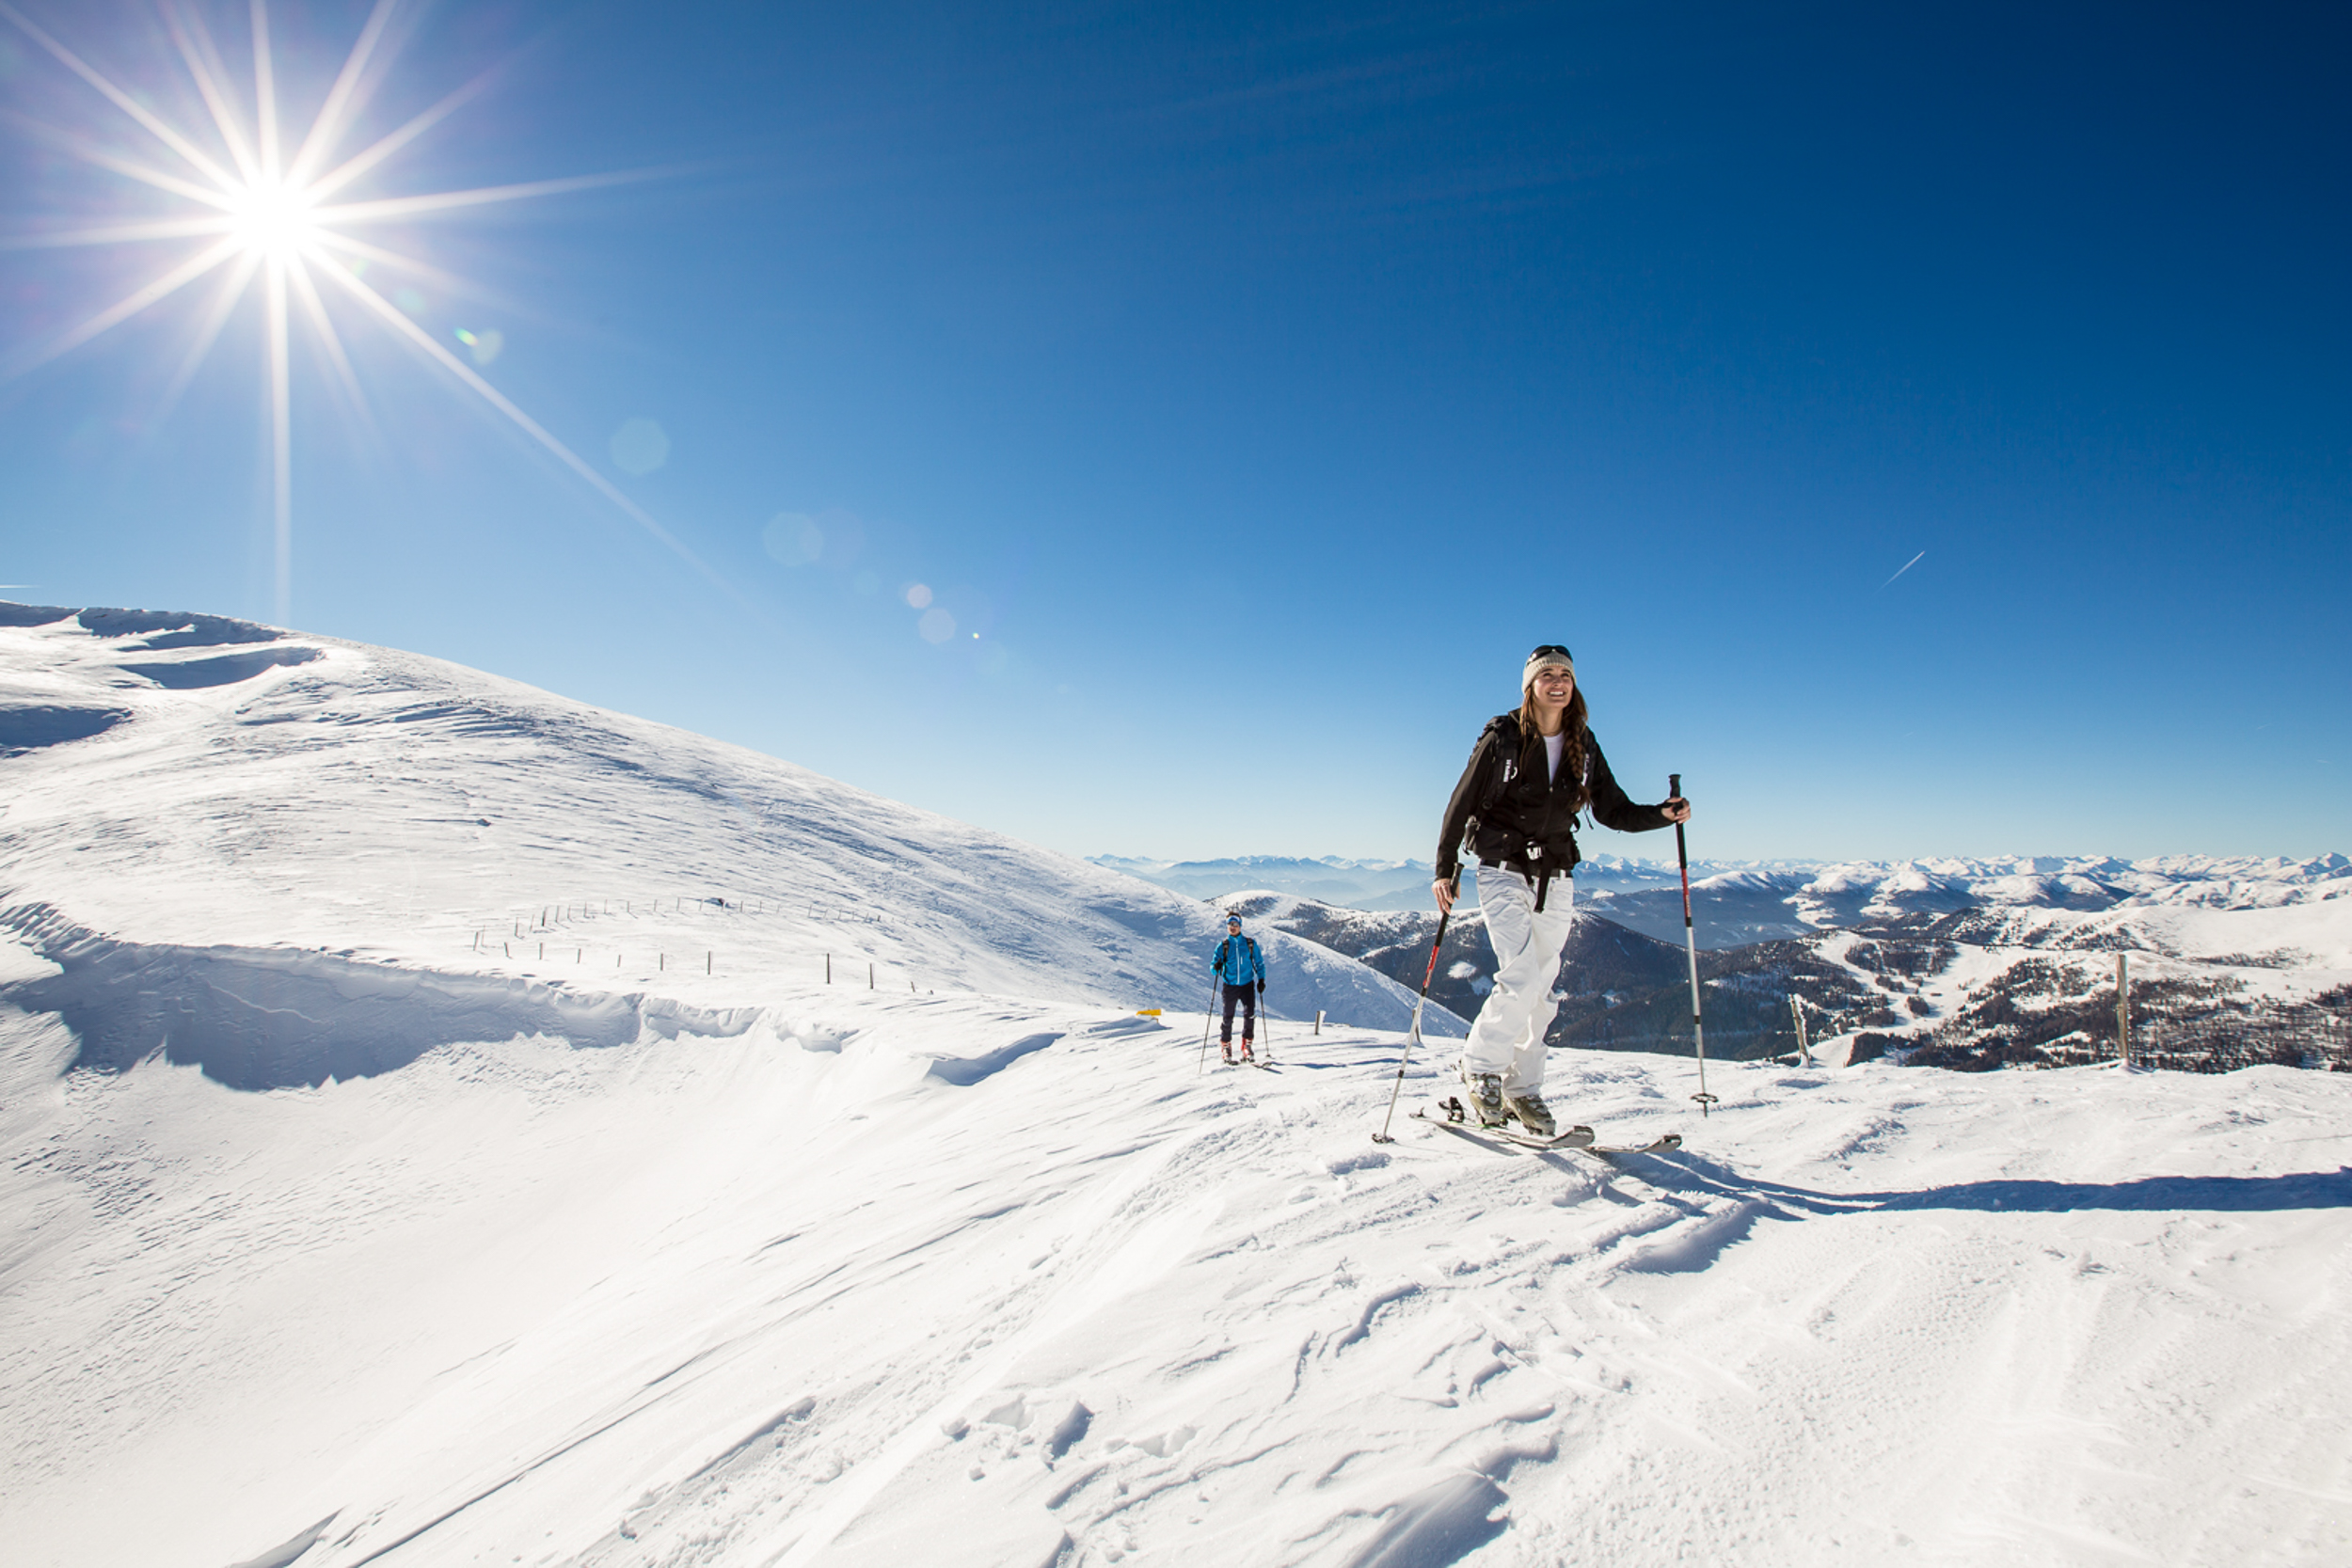 Off the slopes: Ski touring in the Carinthian Nockberge mountains directly in Bad Kleinkirchheim. Winter vacation off the slopes